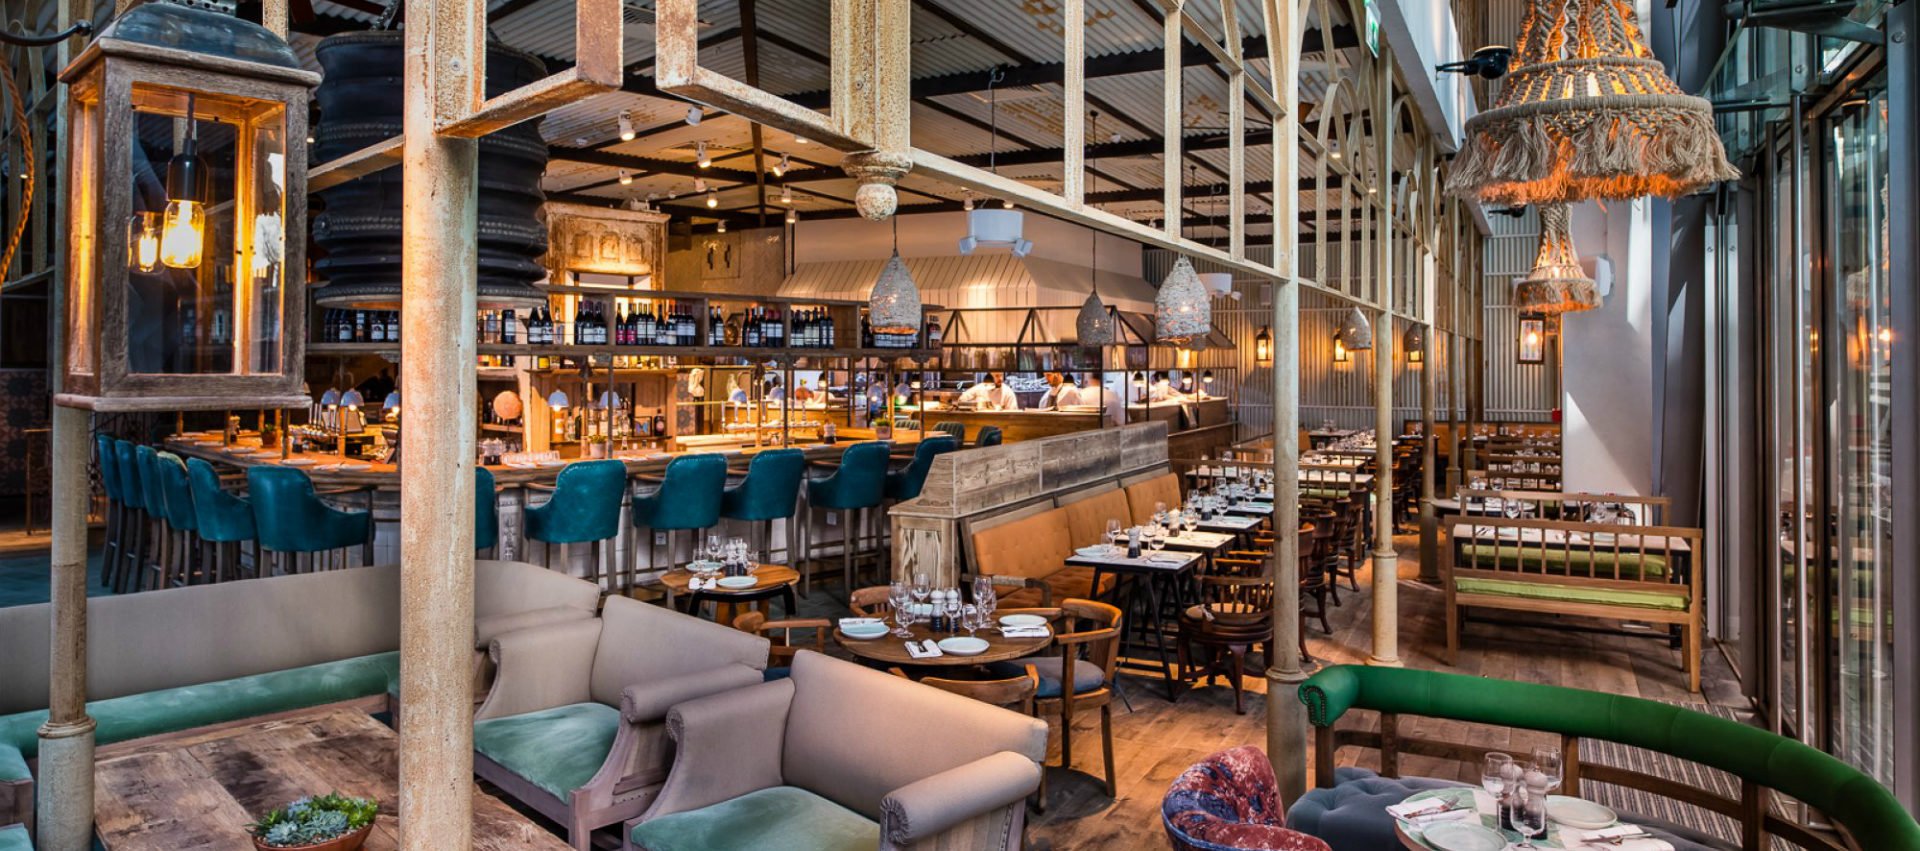 The Nudge London on Twitter: "Want to head to the bohemian @railhouse